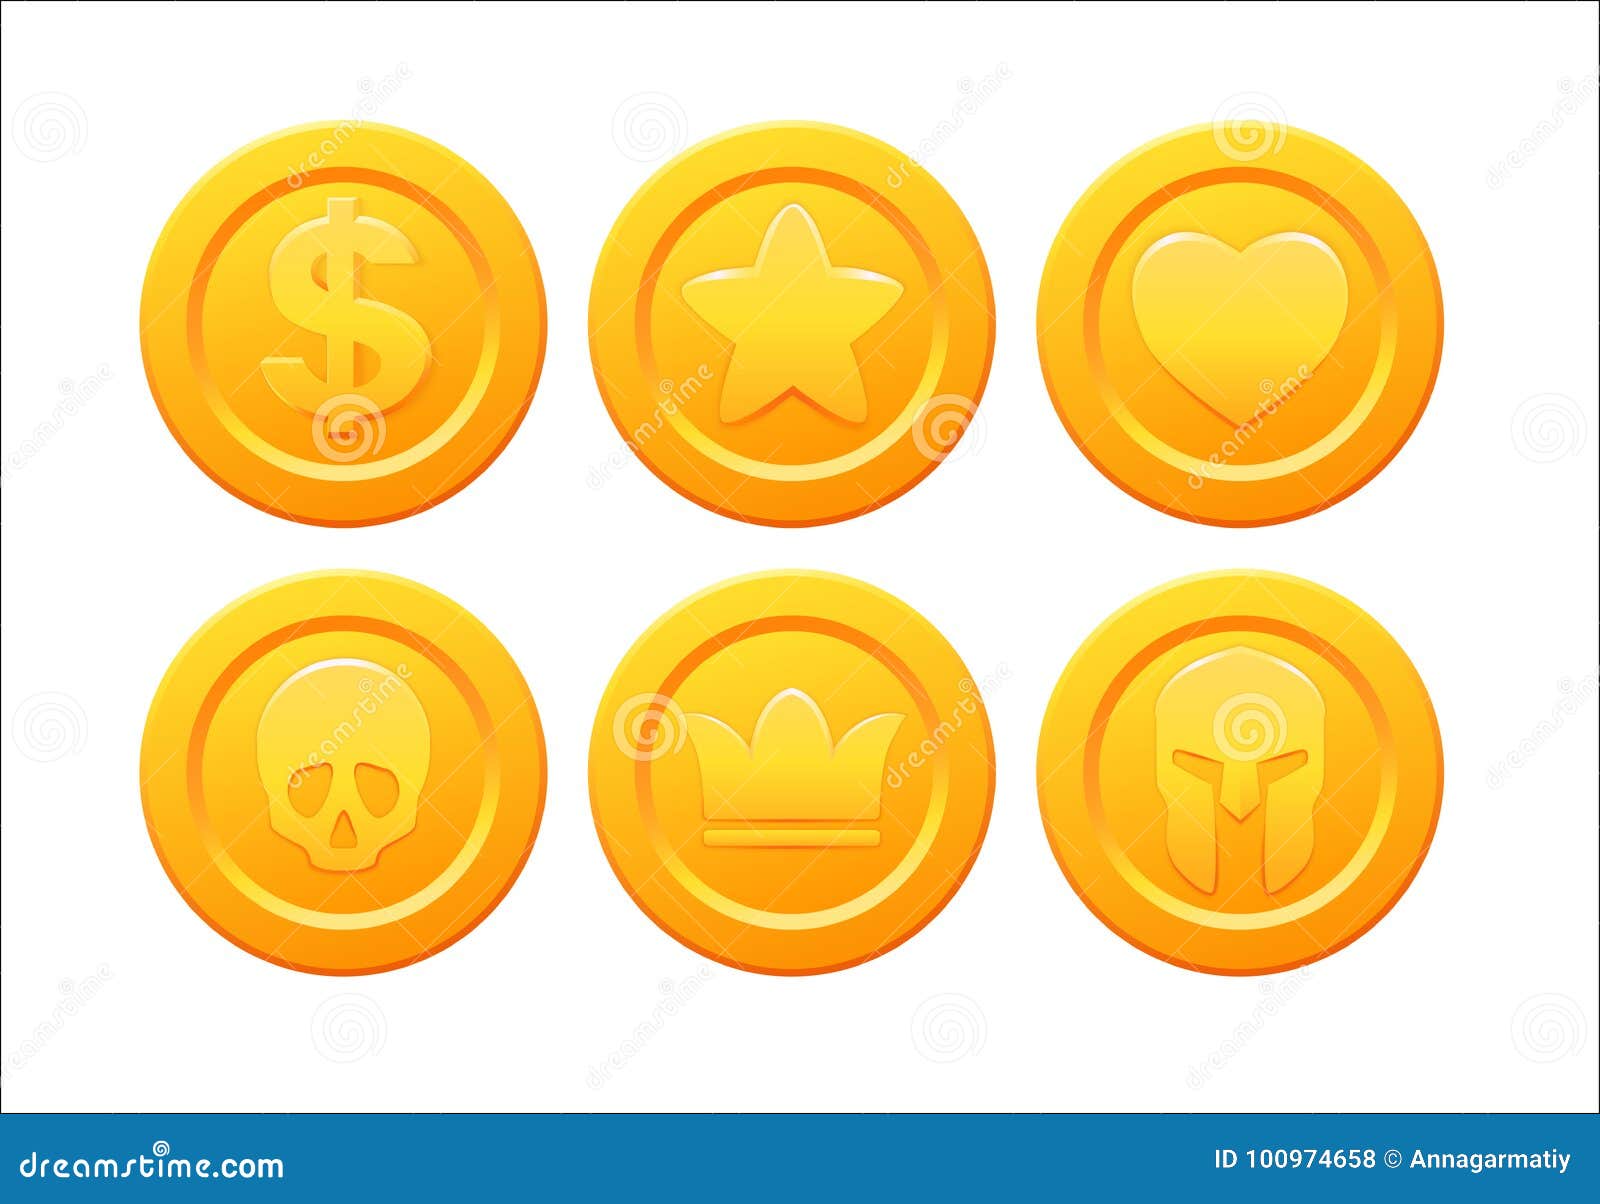 Set of game coins 1 stock vector. Illustration of gold ...